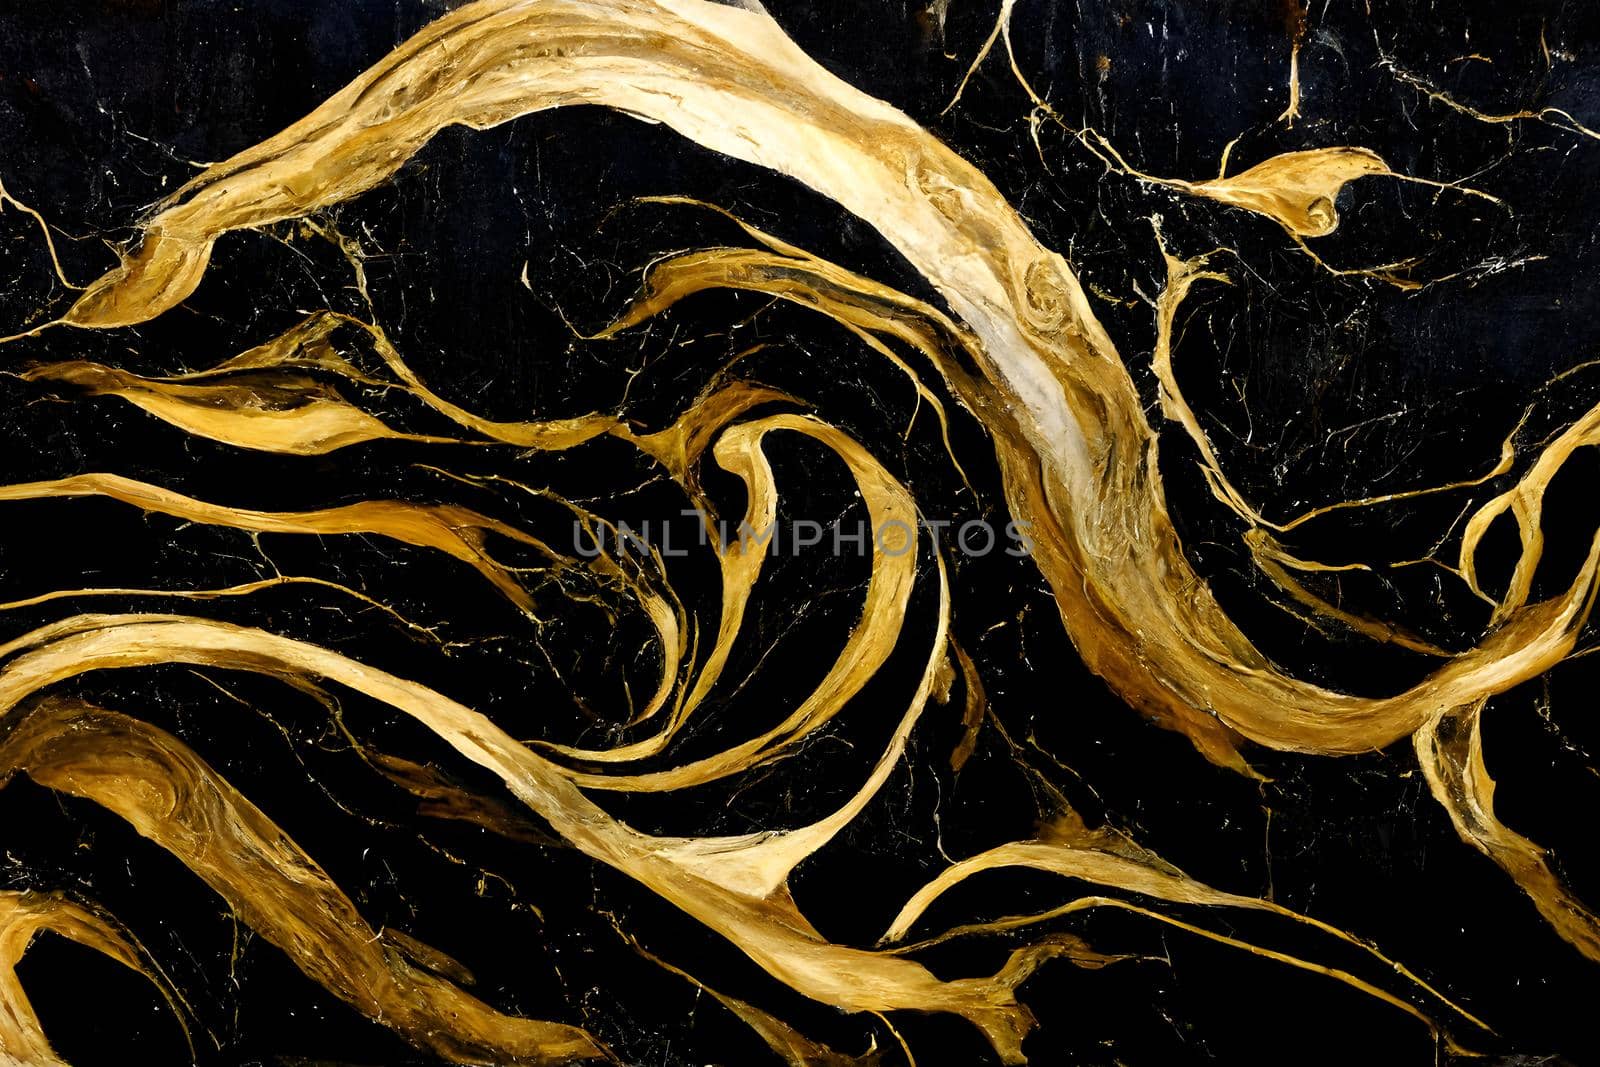 Black-golden marble luxury texture and background, neural network generated art. Digitally generated image. Not based on any actual scene or pattern.